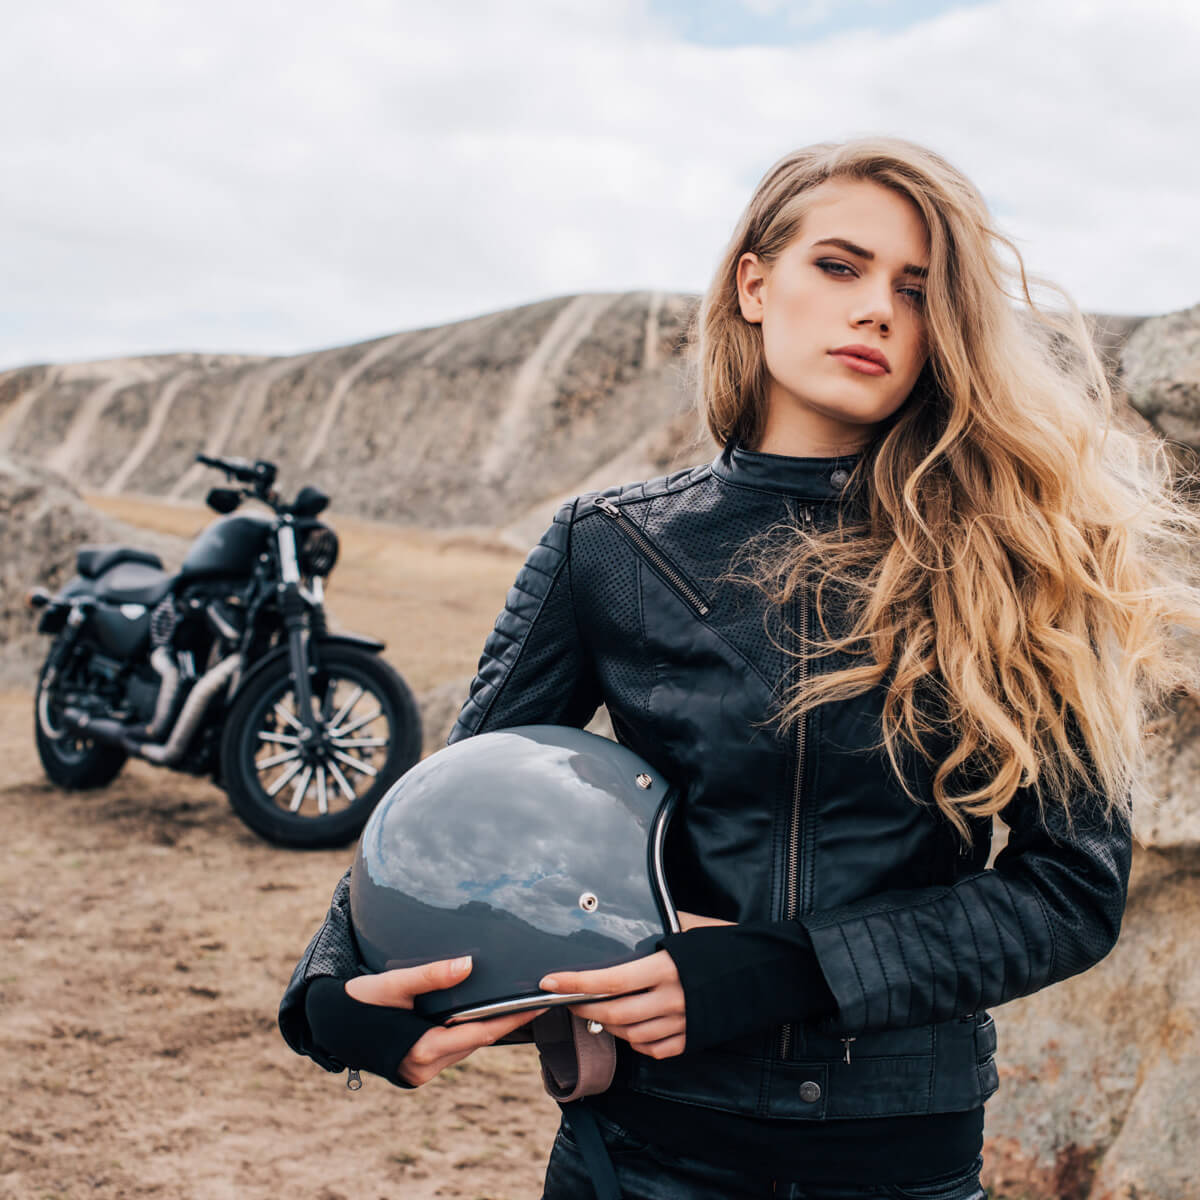 Holey Moley - The Benefits of Perforated Leather Motorcycle Jackets